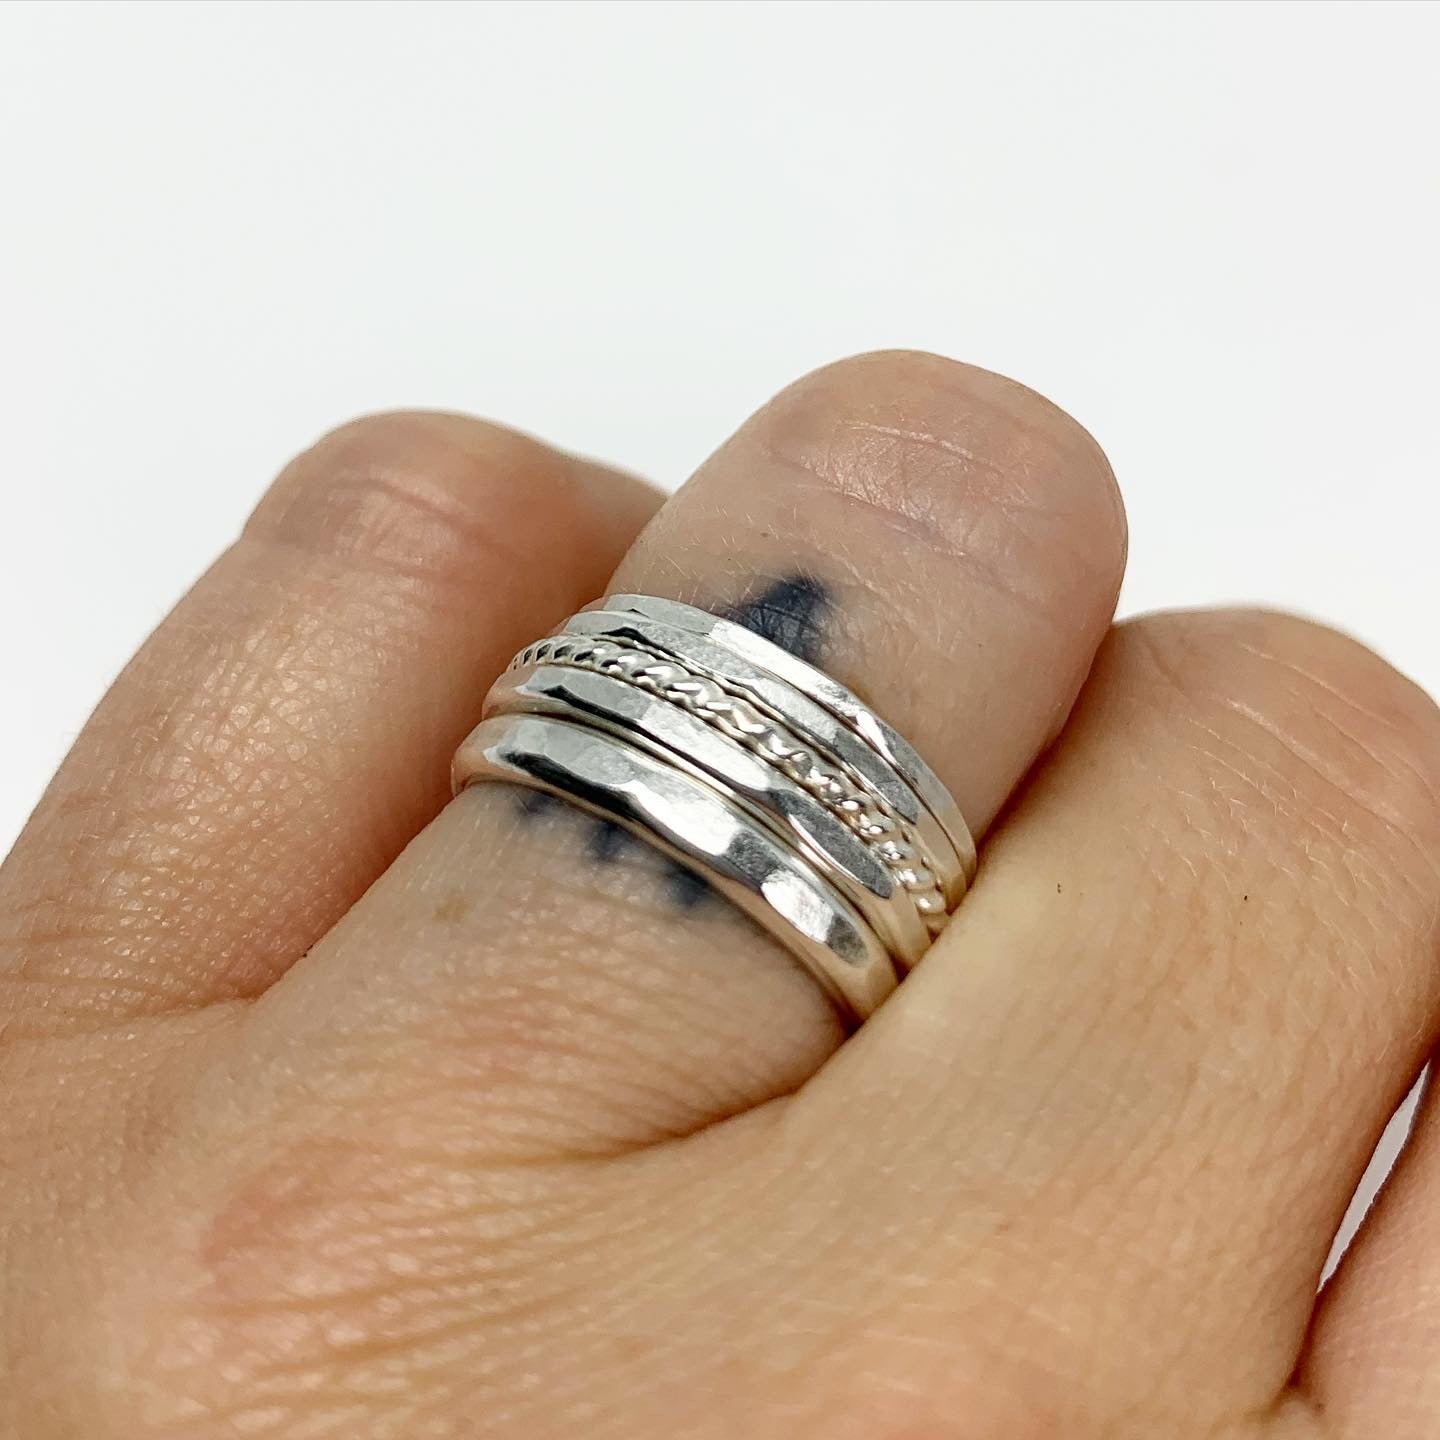 Bridal Stacking Ring Set - KME means the very best